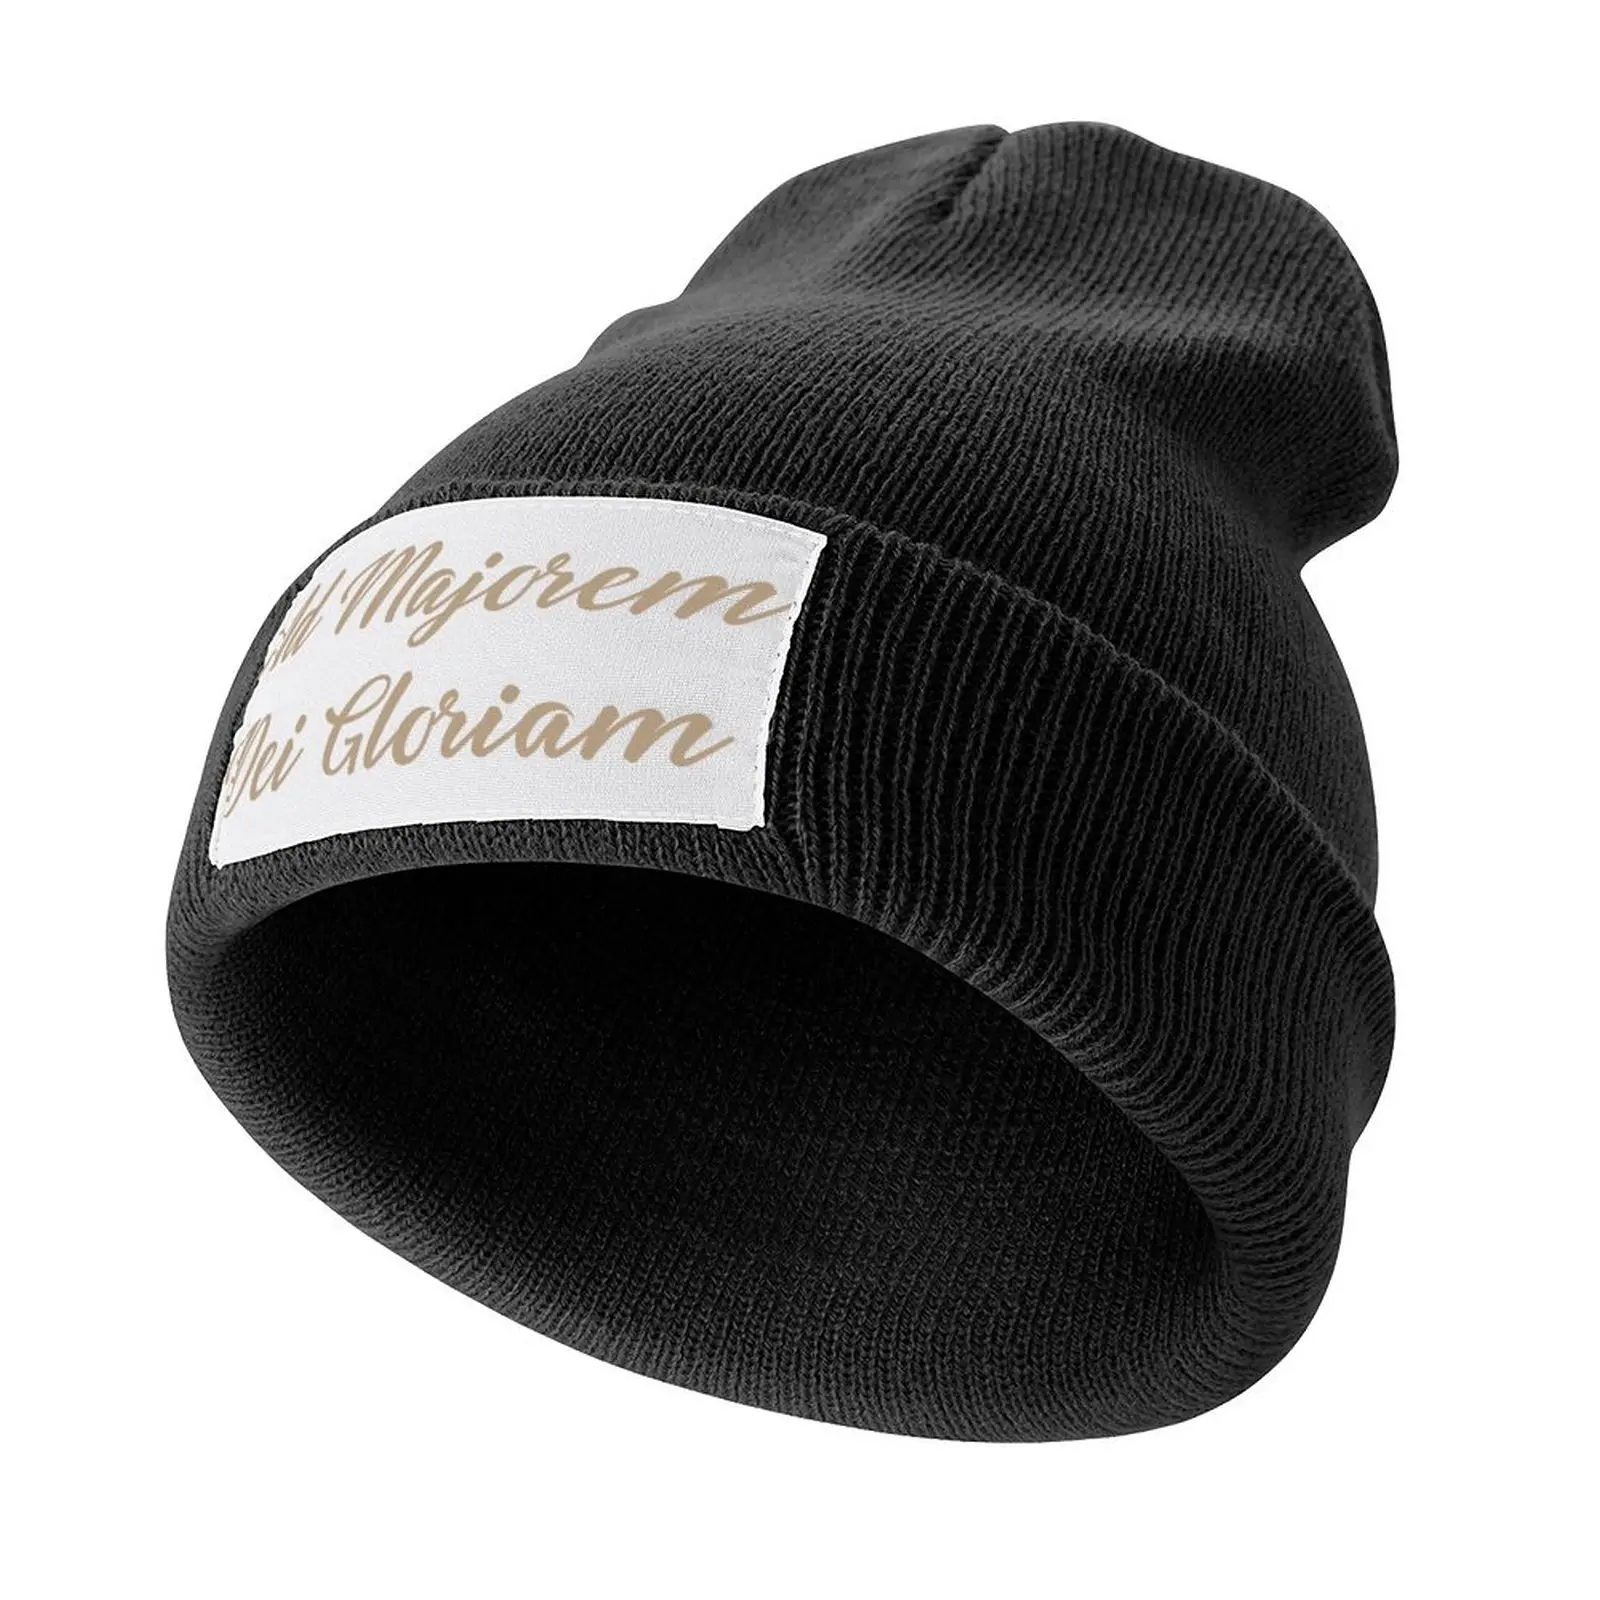 

Ad Majorem Dei Gloriam - For The Greater Glory Of God Knitted Cap foam party hats black Thermal Visor Cap For Men Women's